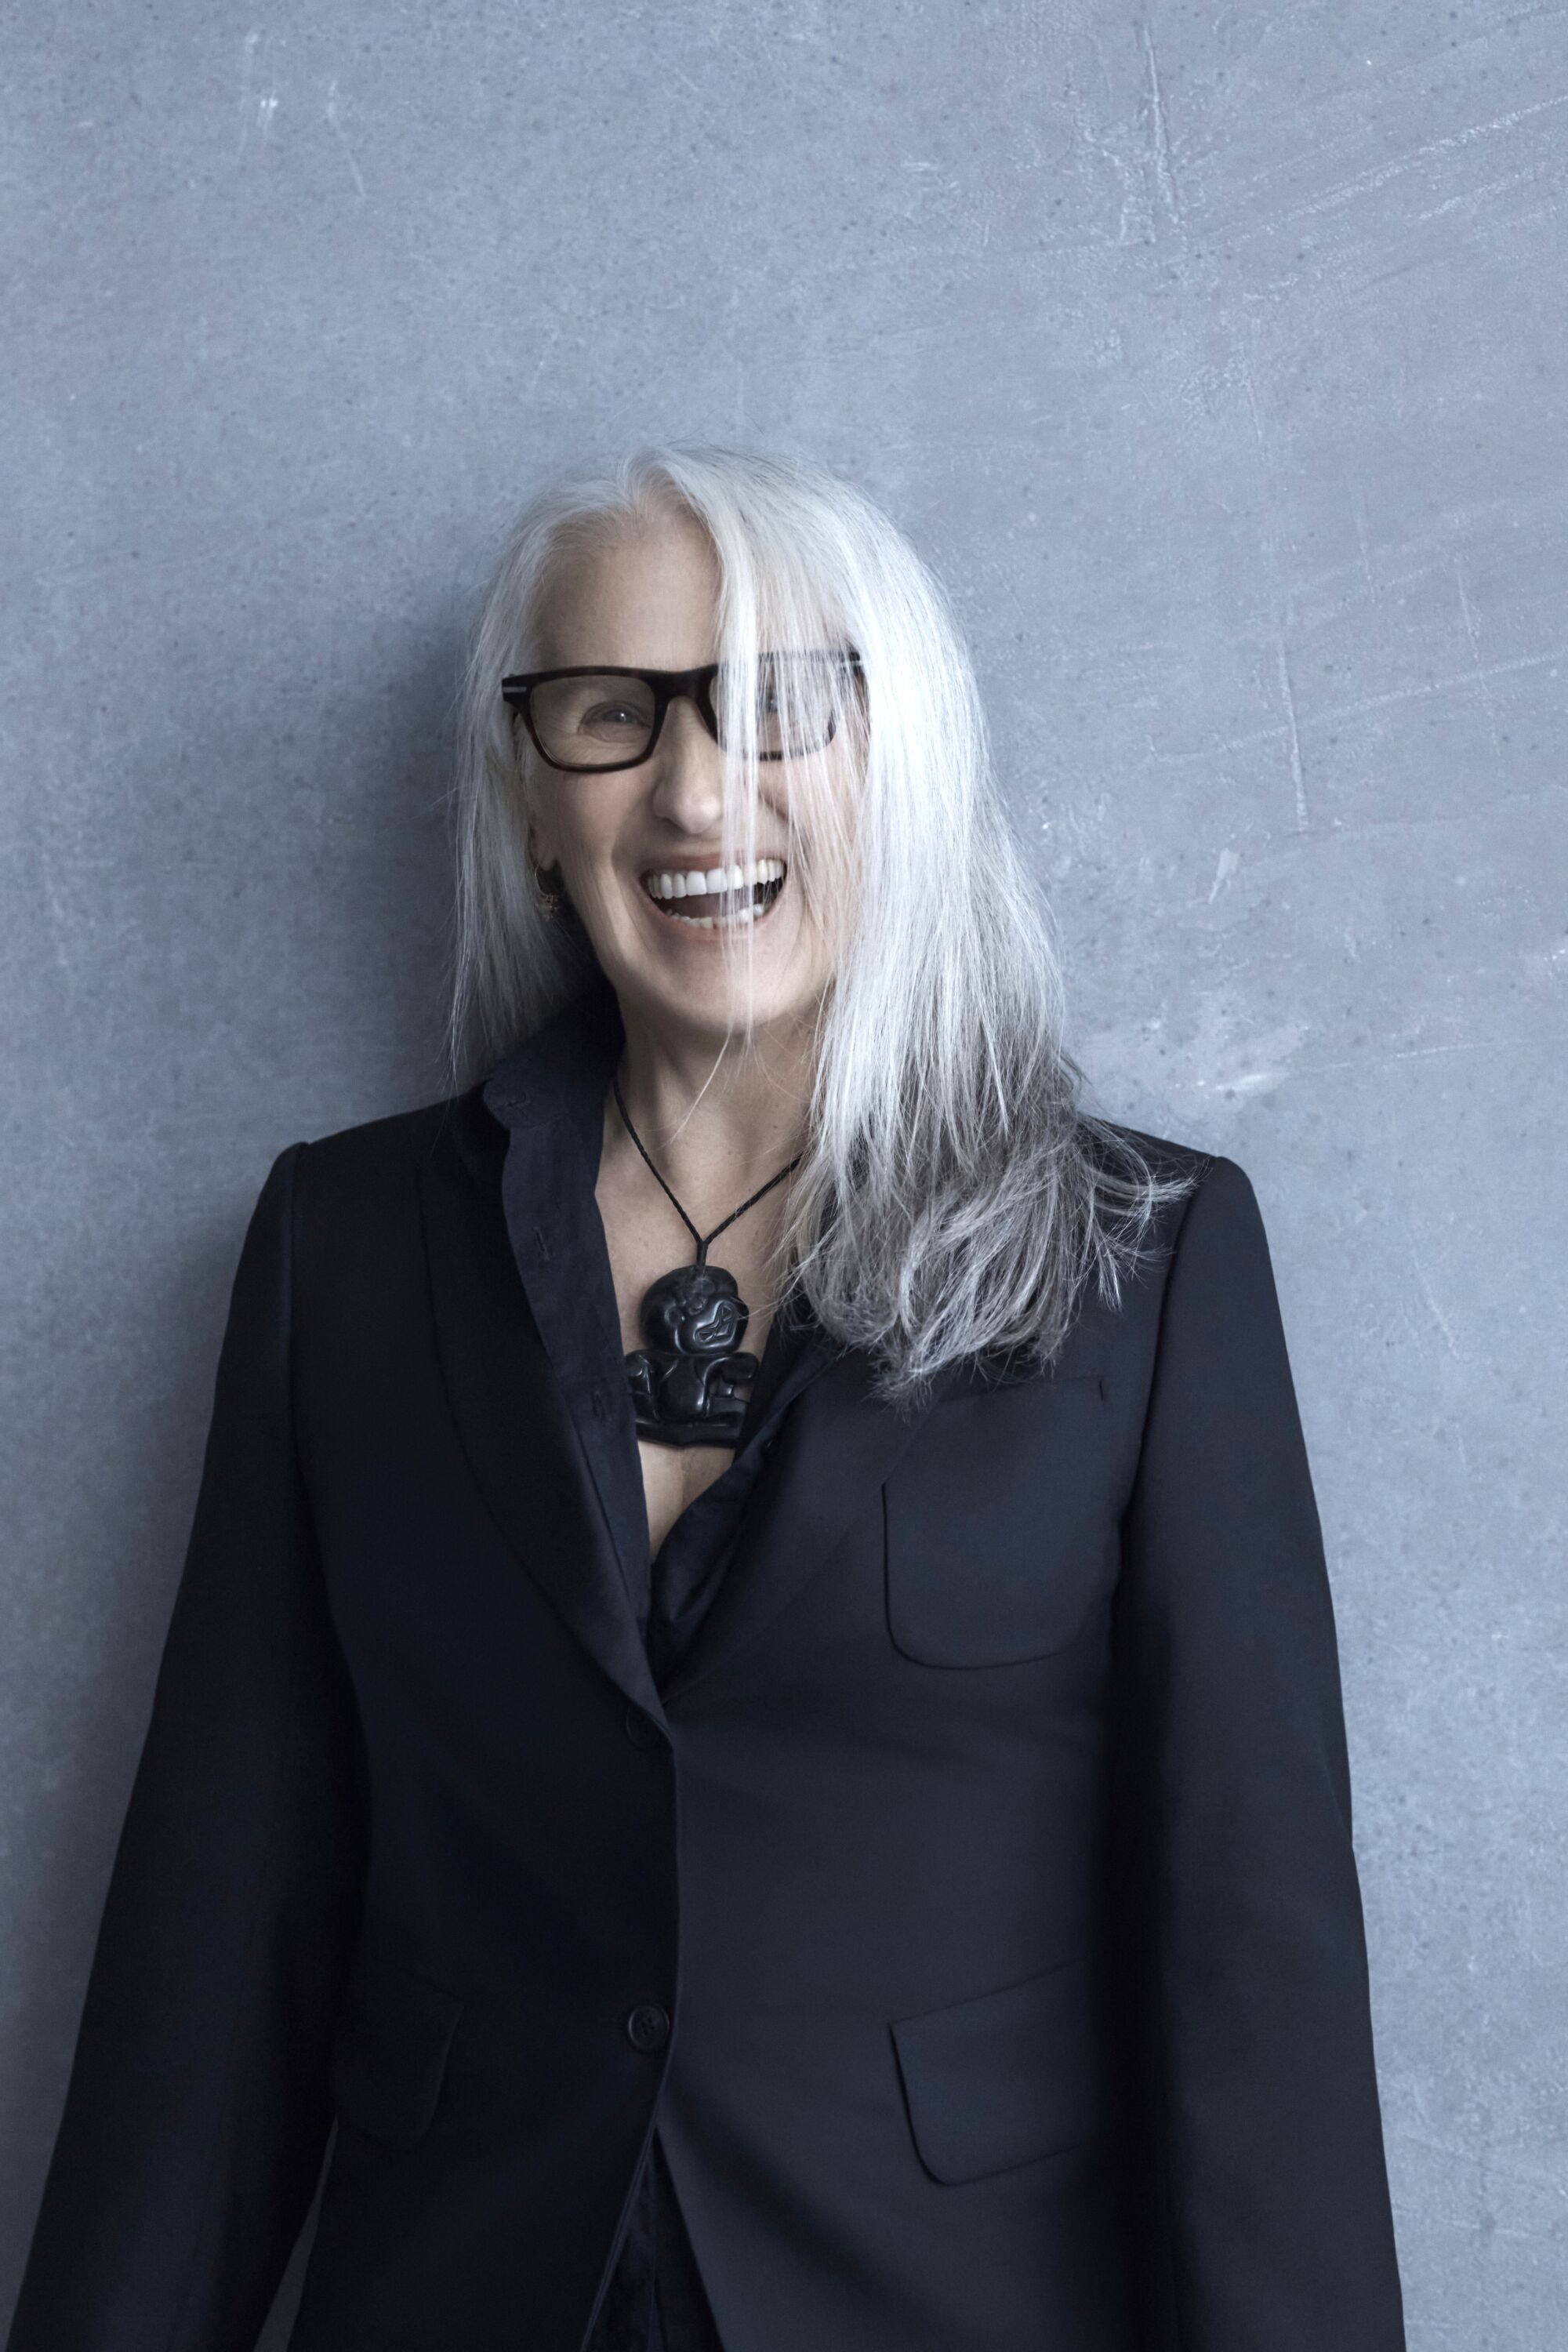 "The Power of The Dog" writer/director Jane Campion. 